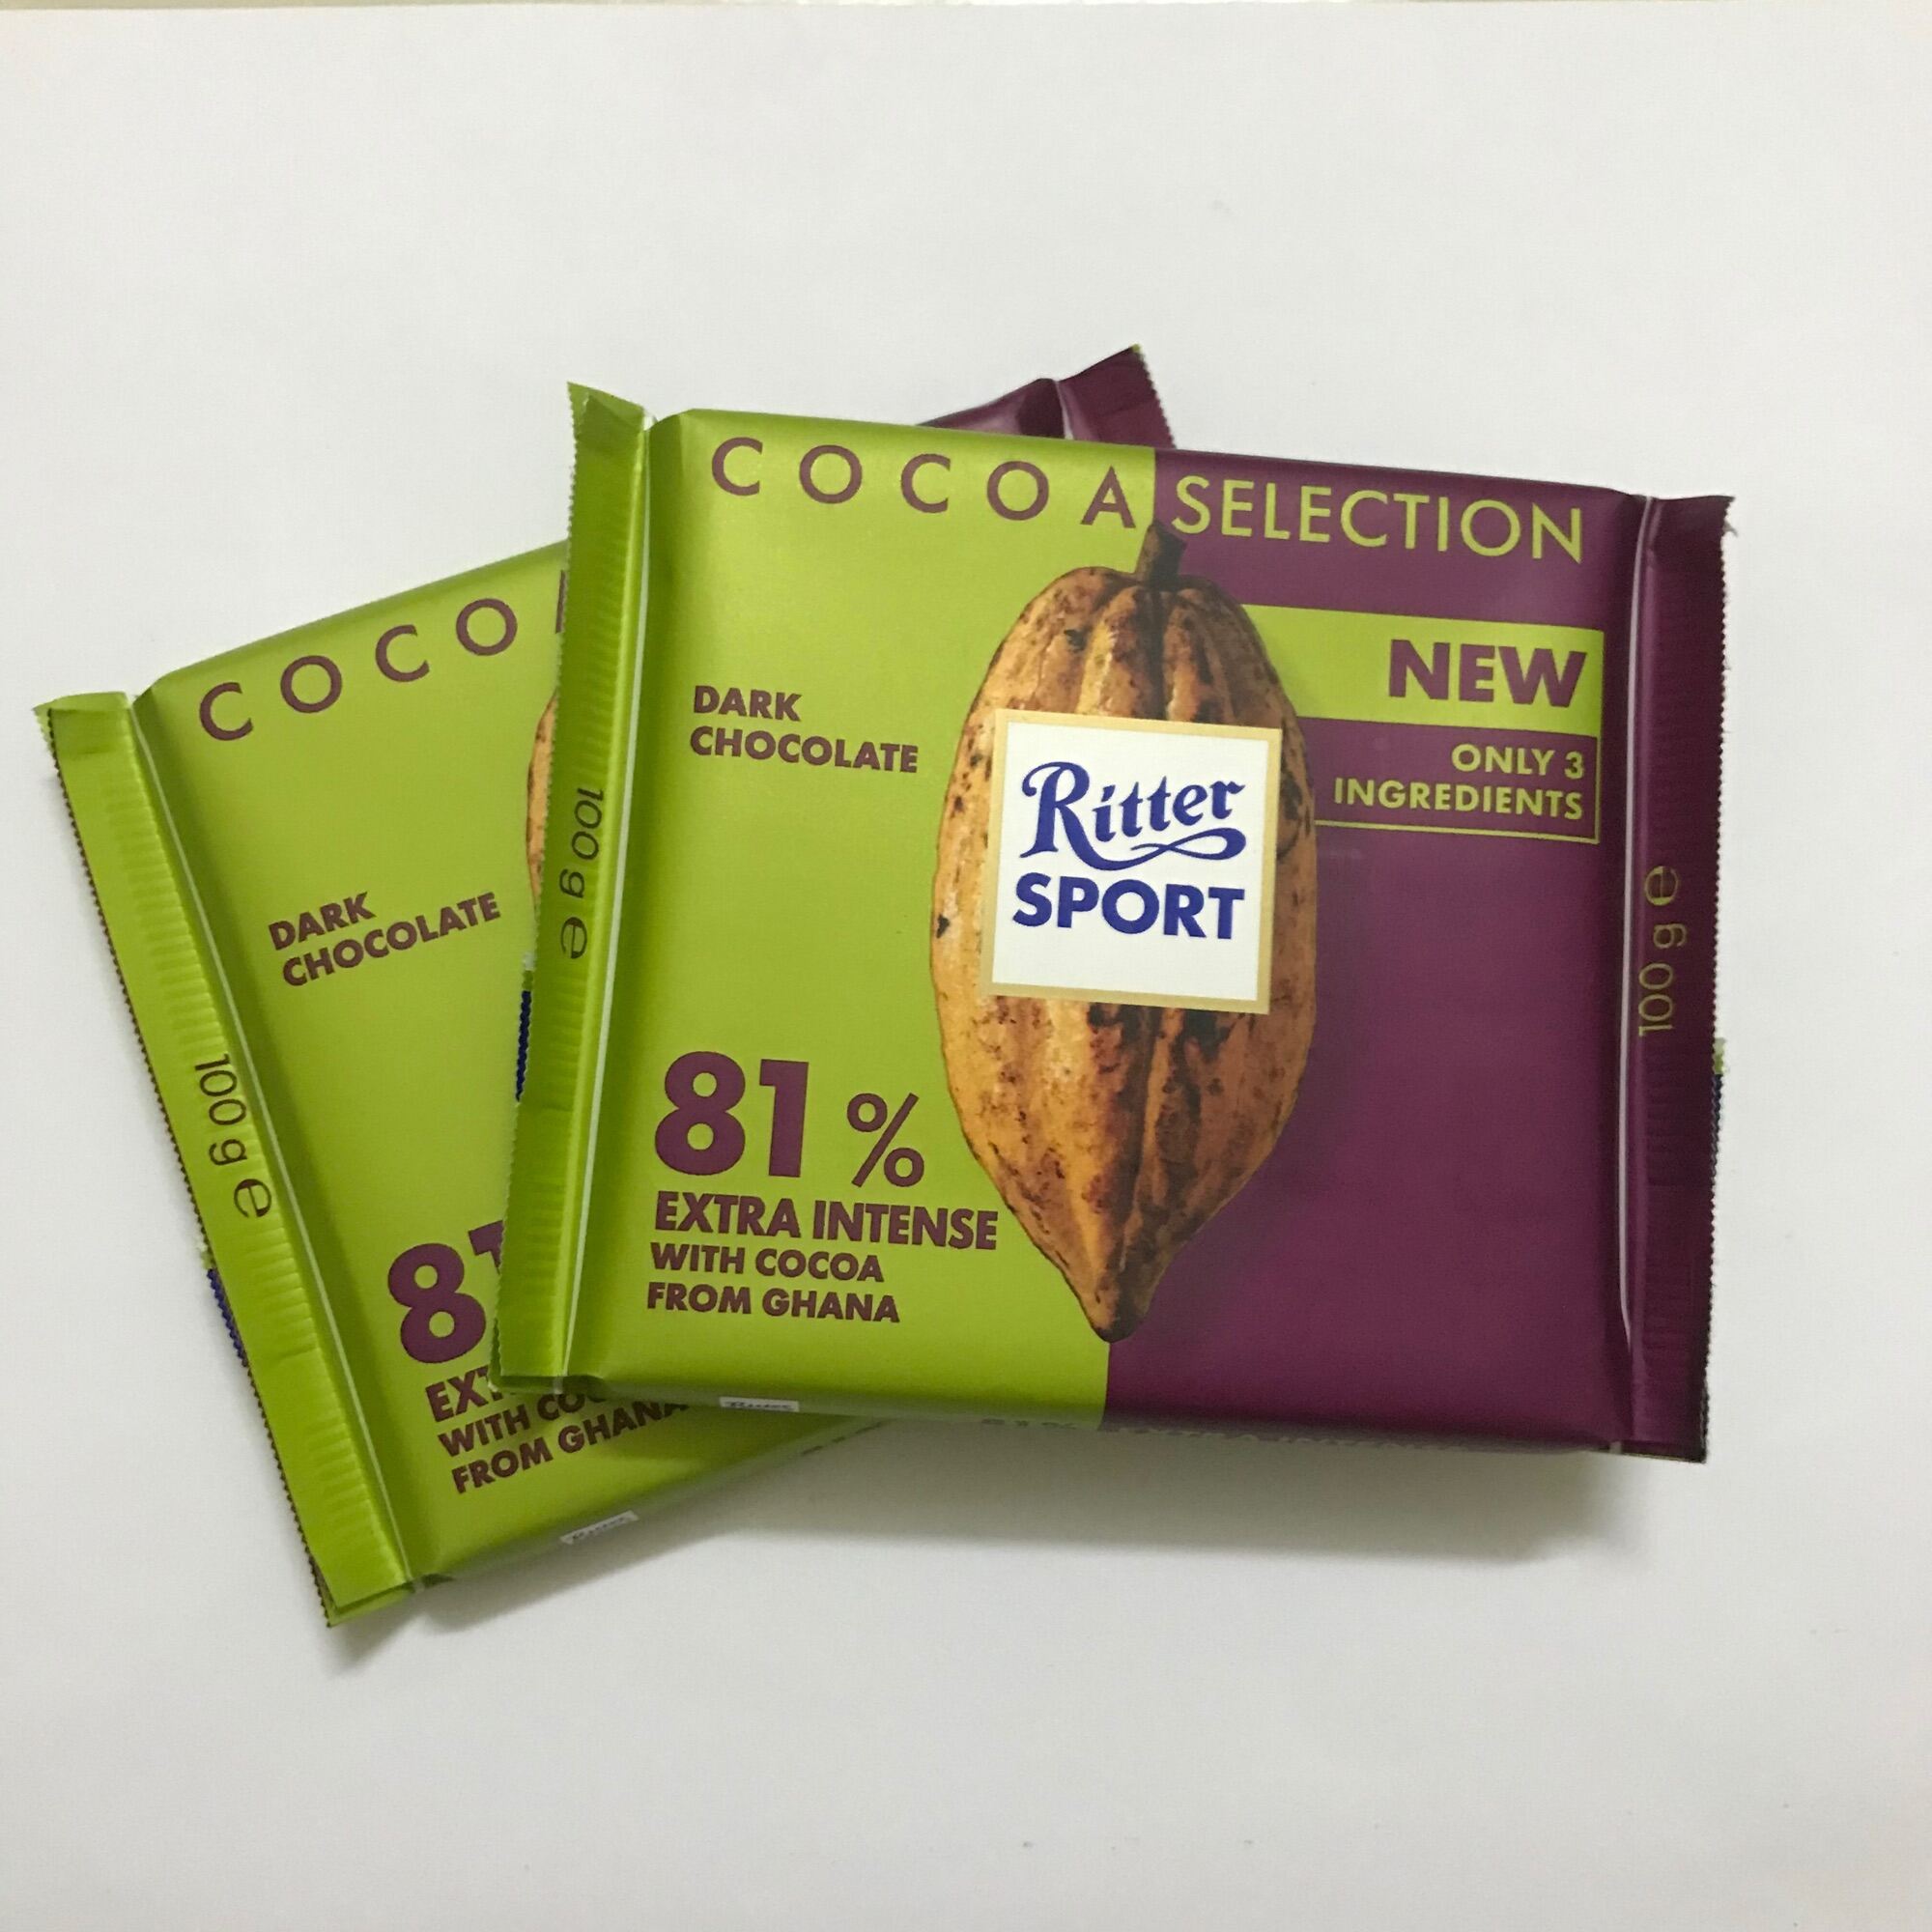 Socola Đen Ritter Sport 81% Cacao Thanh 100g